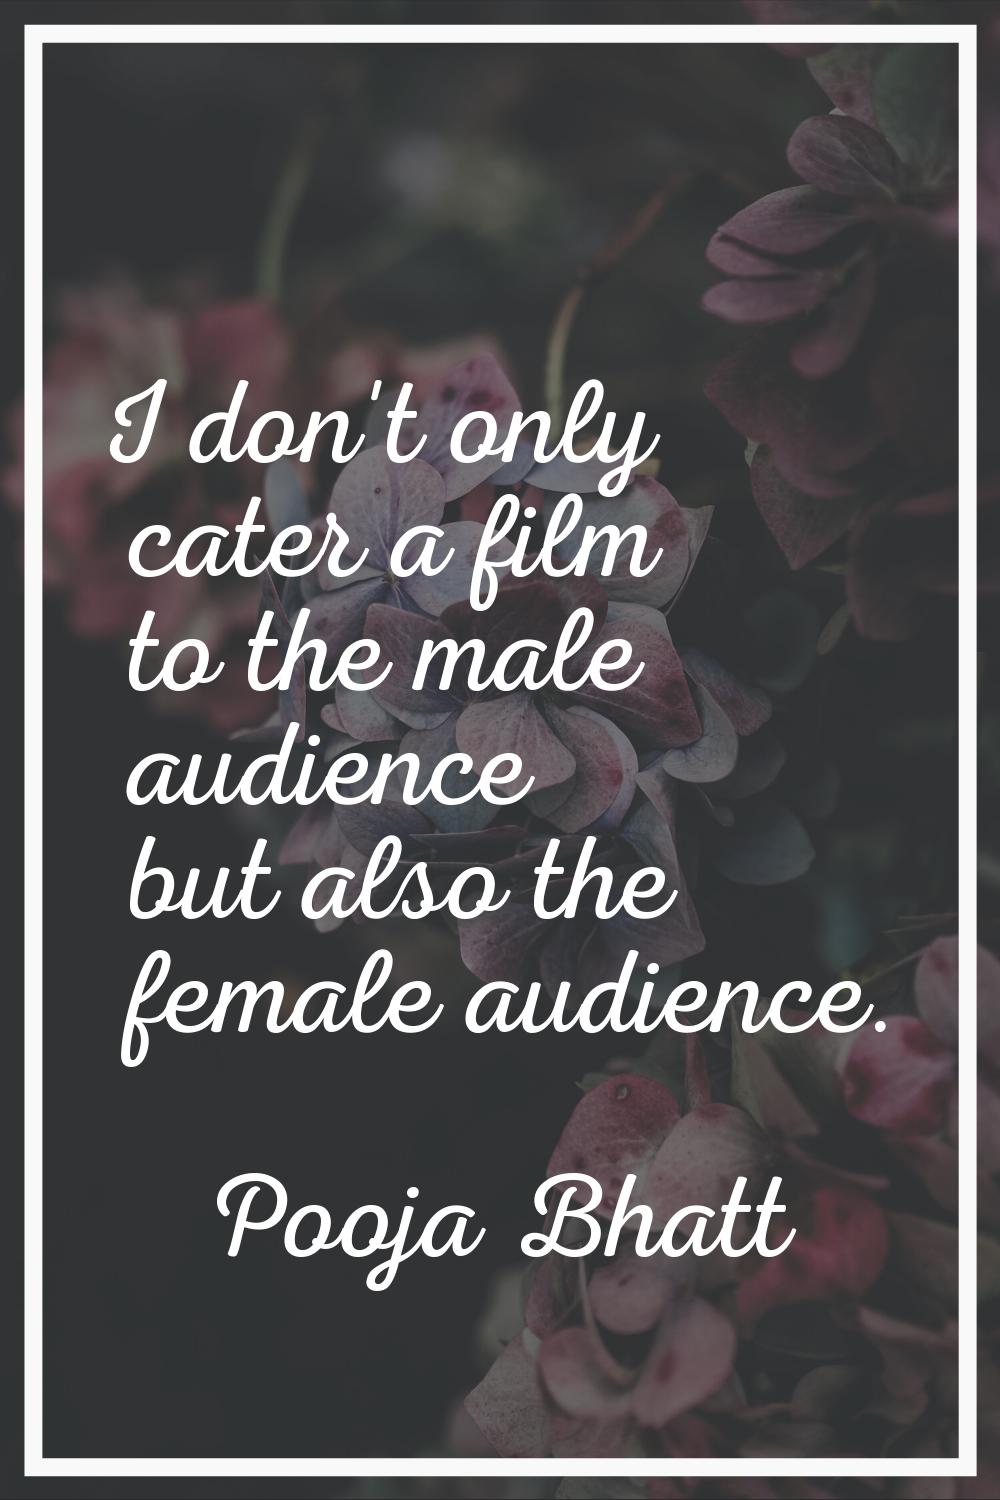 I don't only cater a film to the male audience but also the female audience.